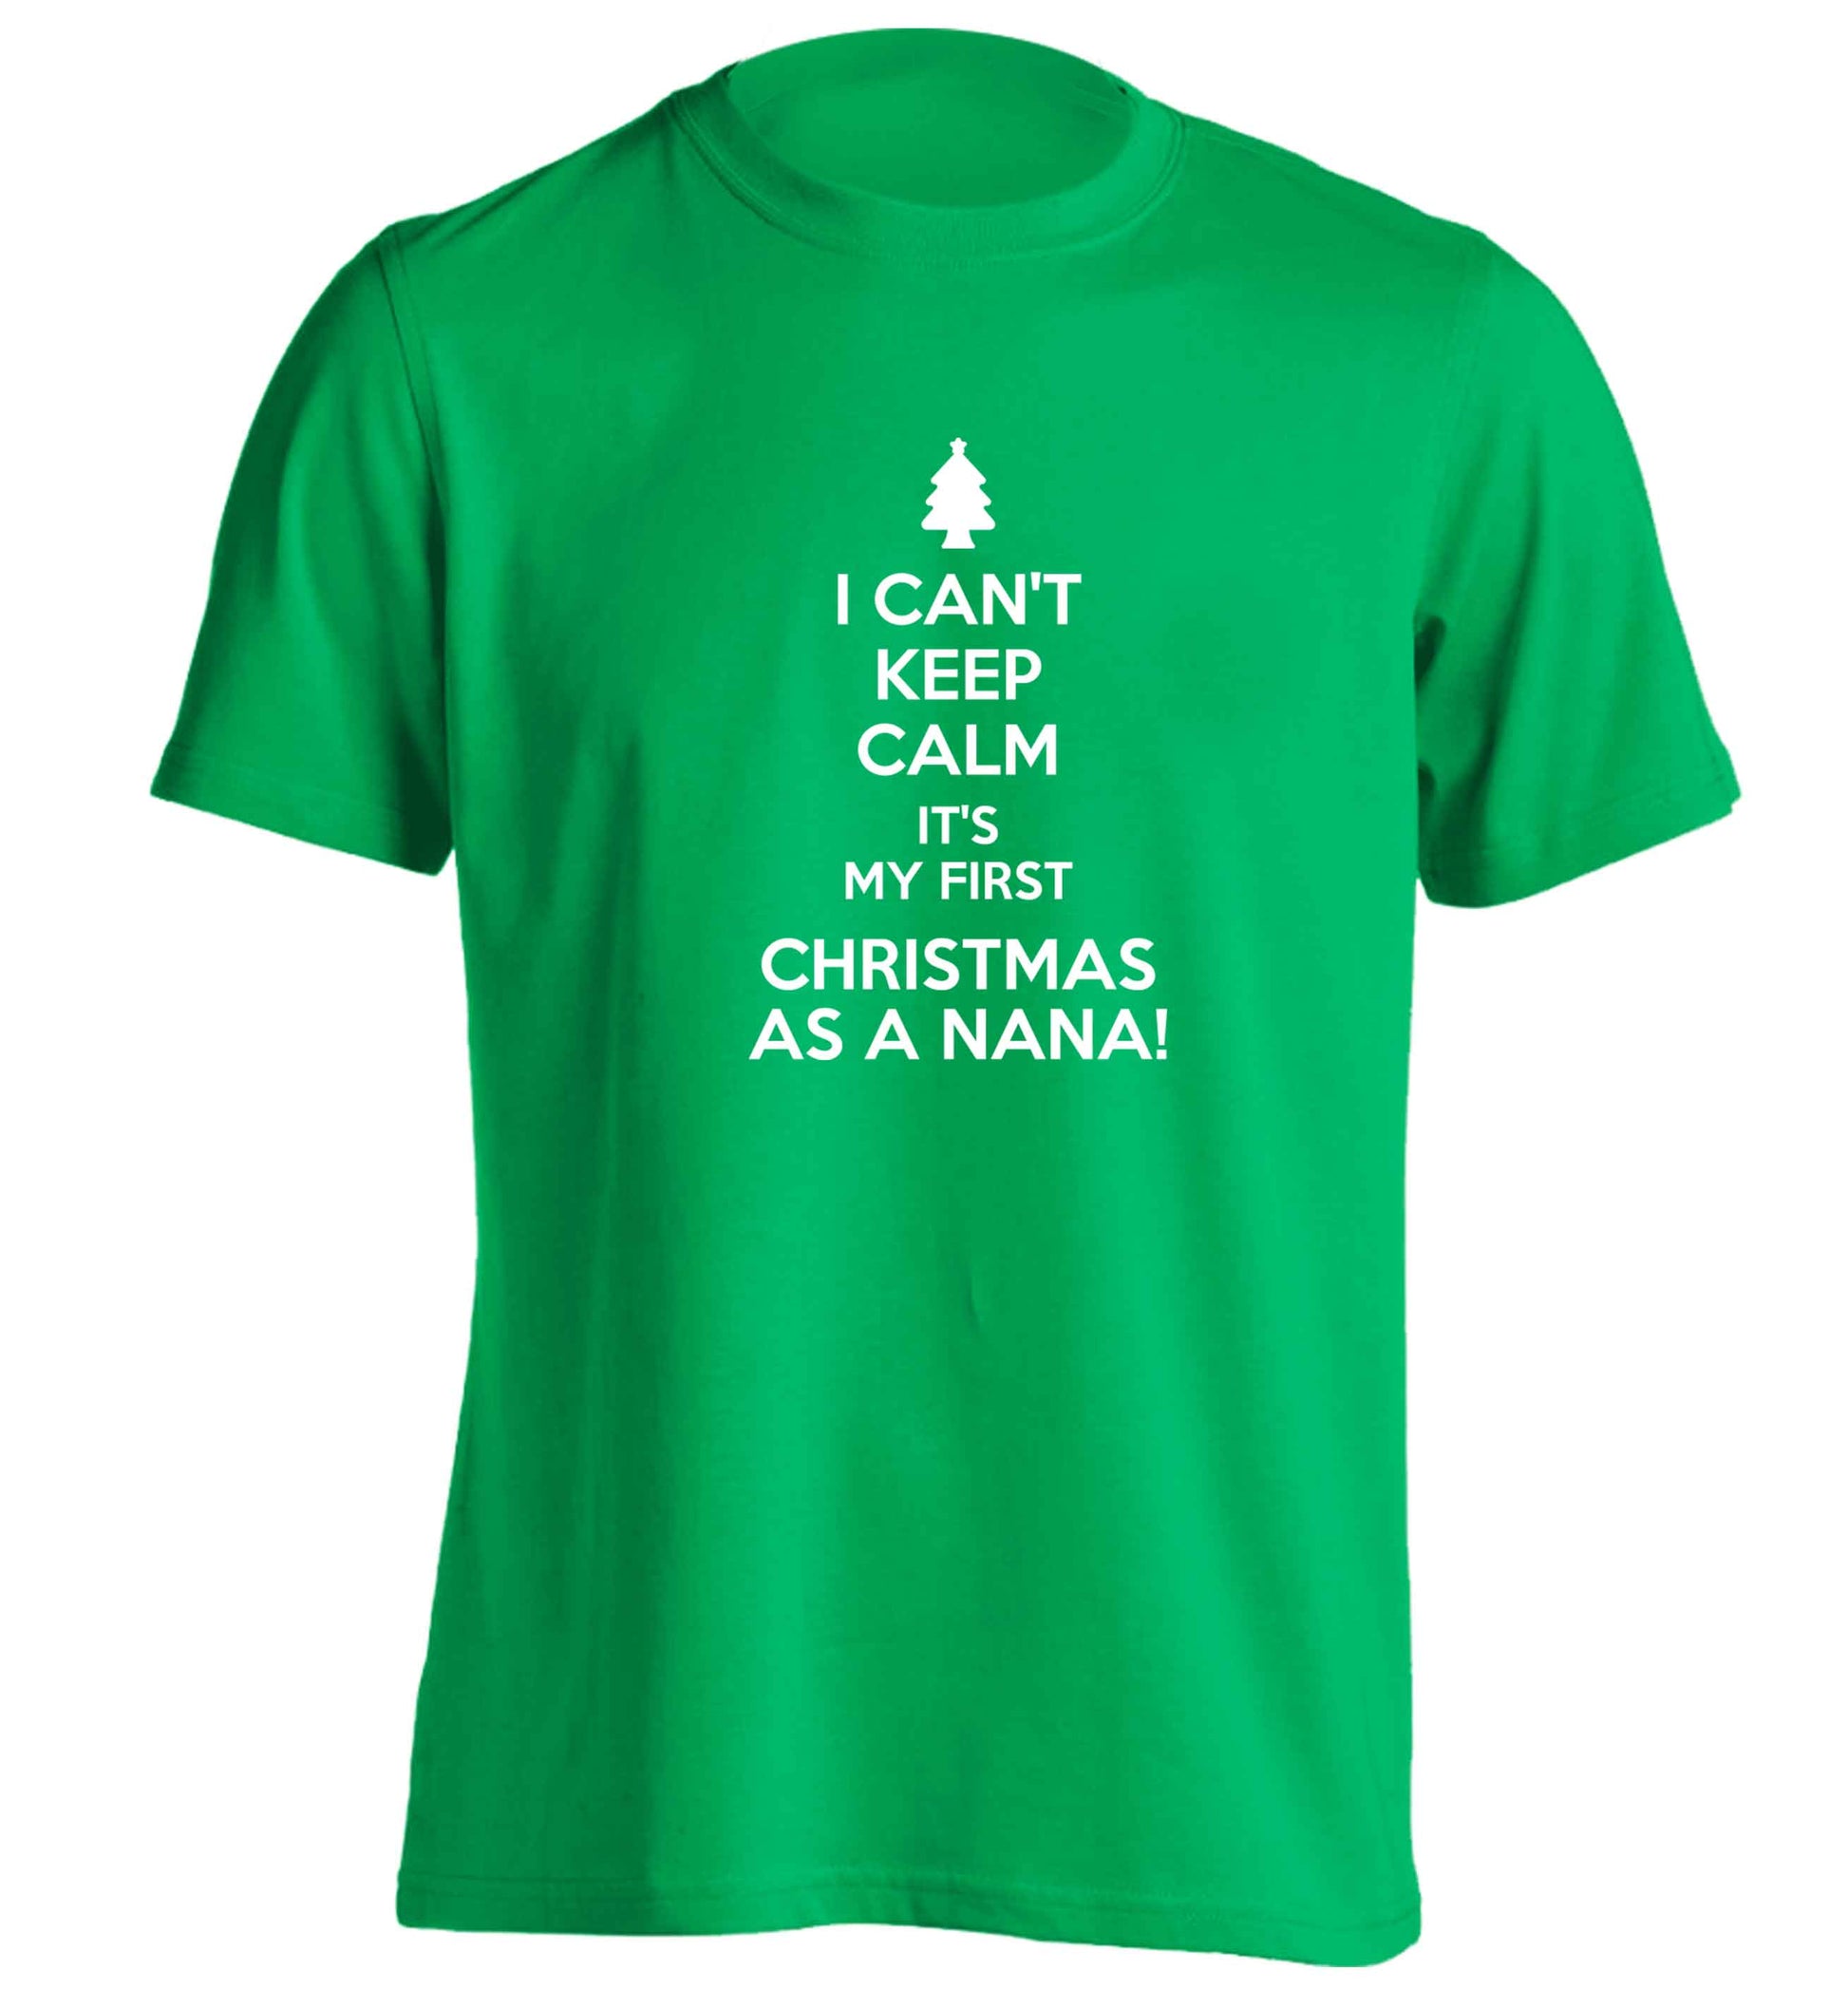 I can't keep calm it's my first Christmas as a nana! adults unisex green Tshirt 2XL